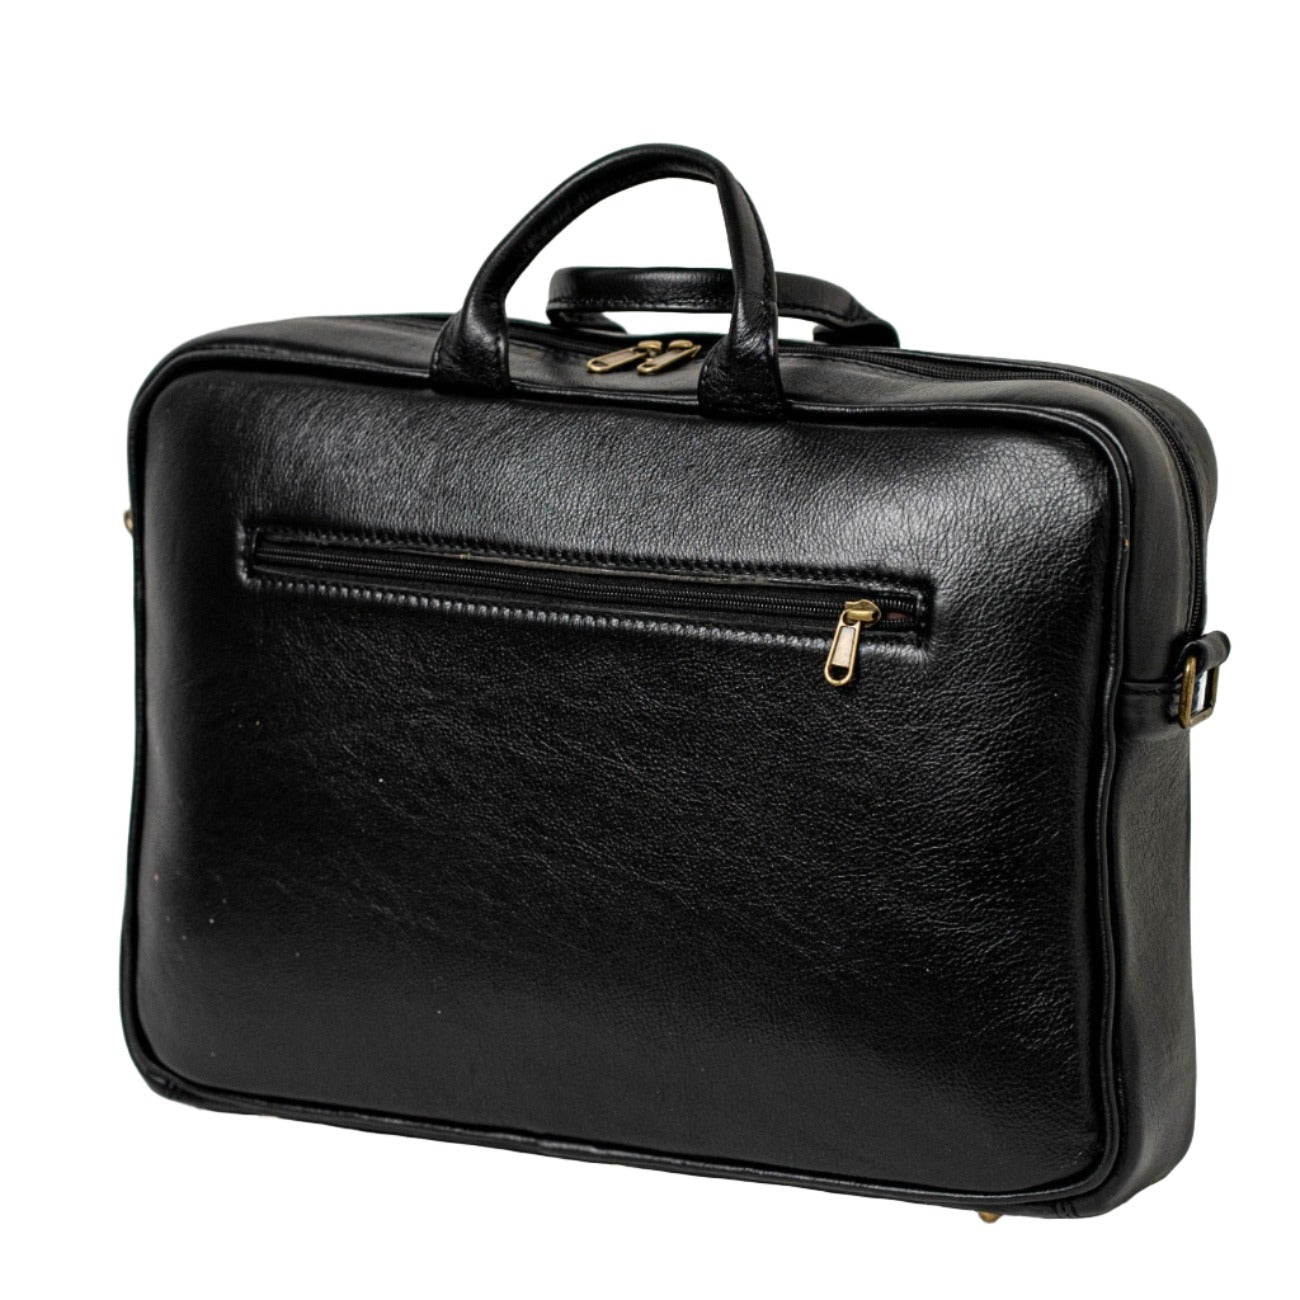 Iconic 15" laptop briefcase